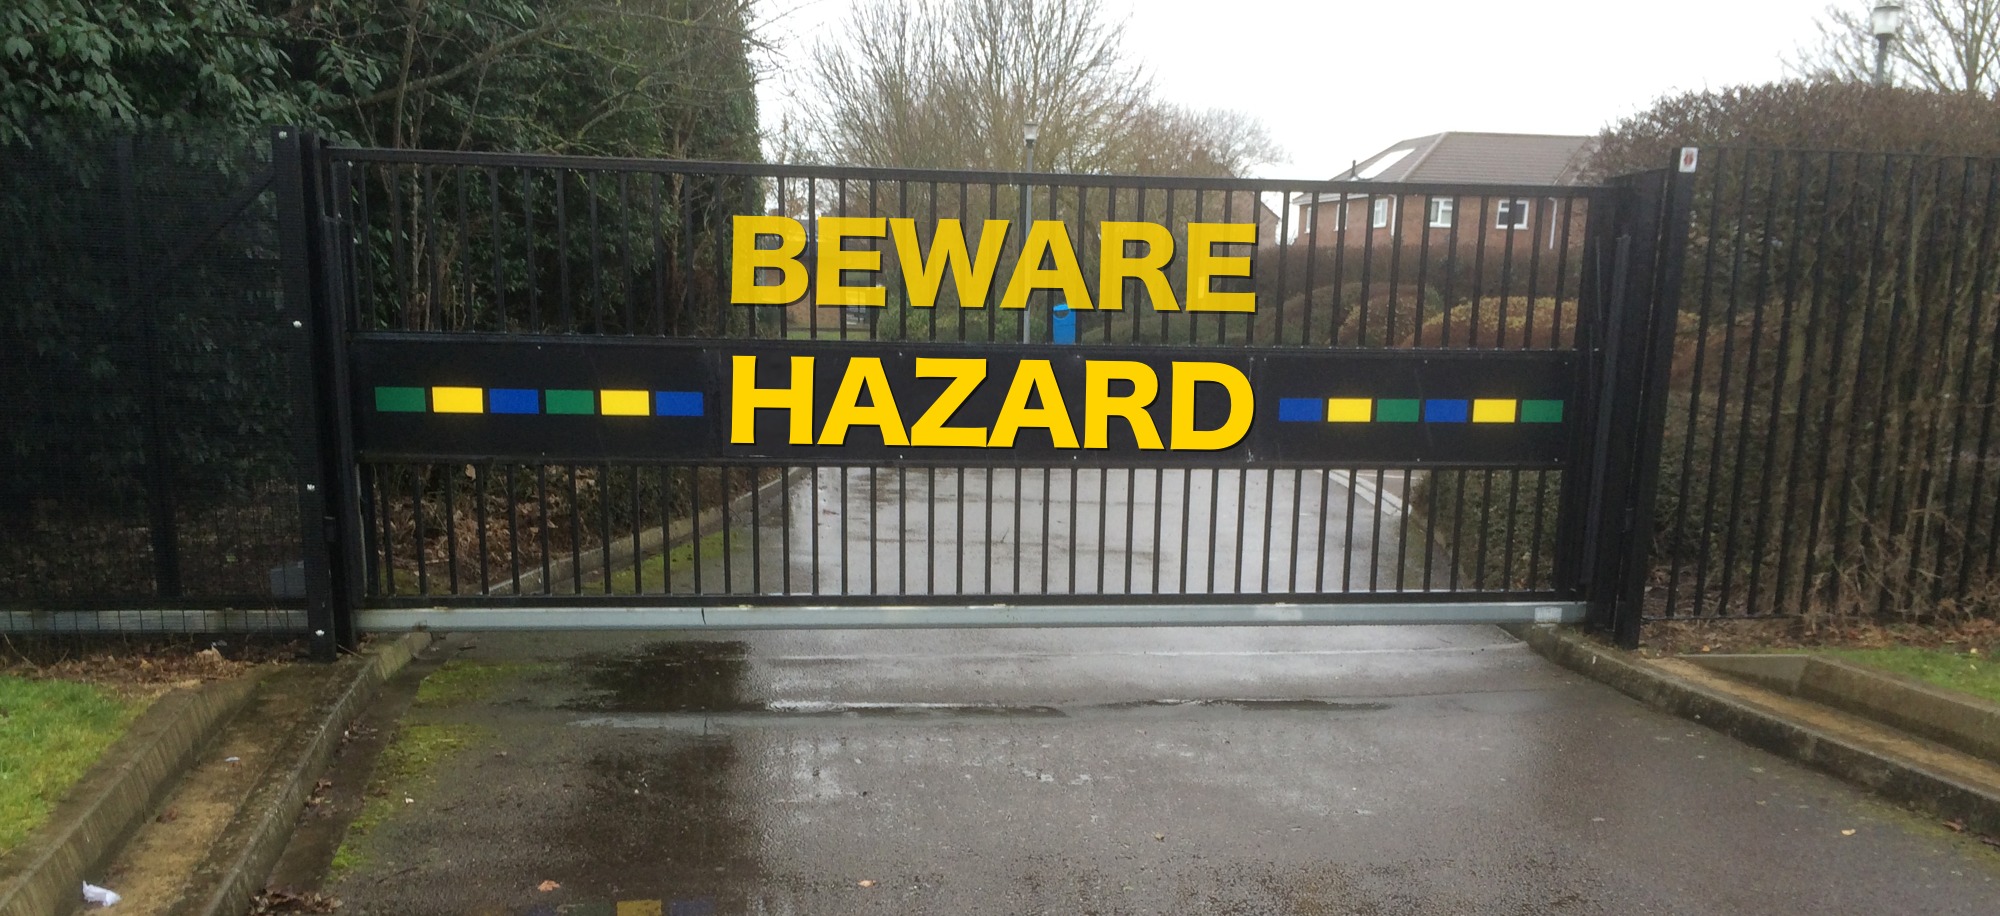 Beware Hazard sign superimposed on automated gate